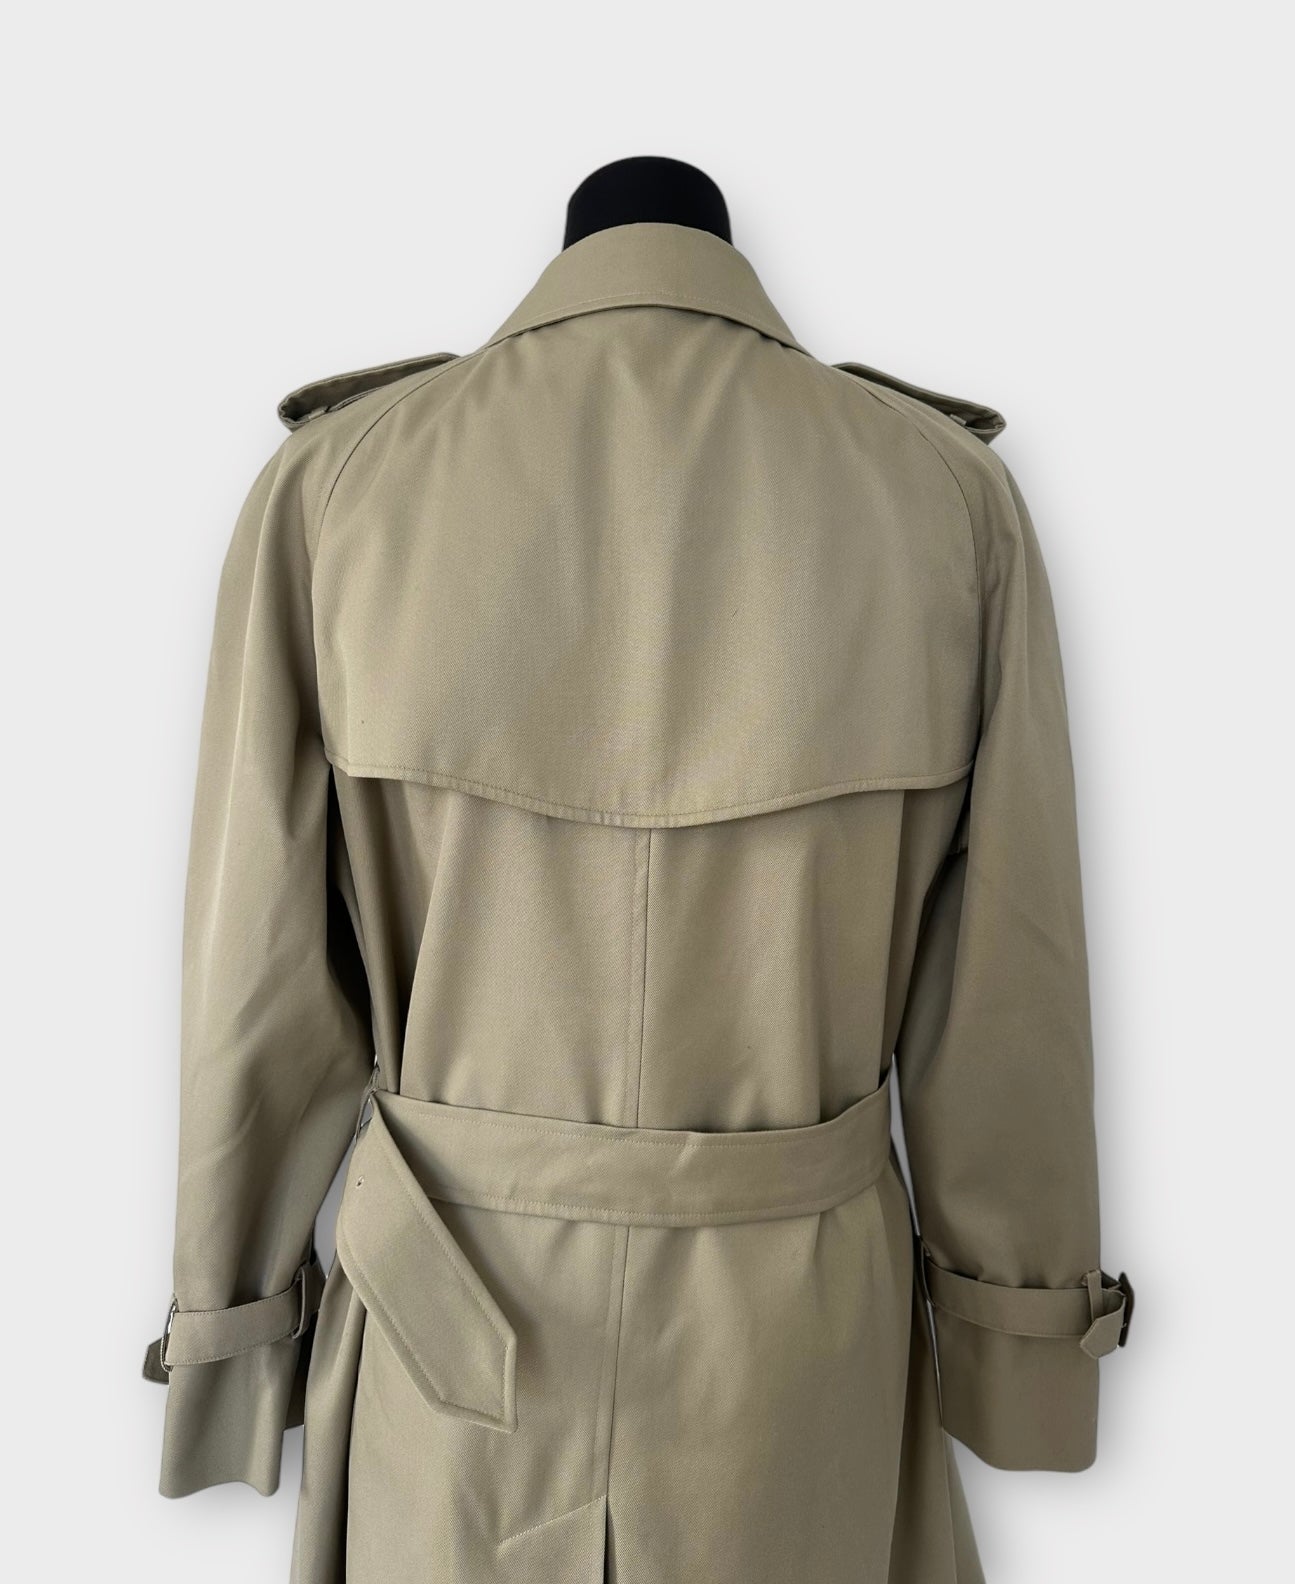 Trench-coat Burberry modèle “the Waterloo ” vintage/ T.M